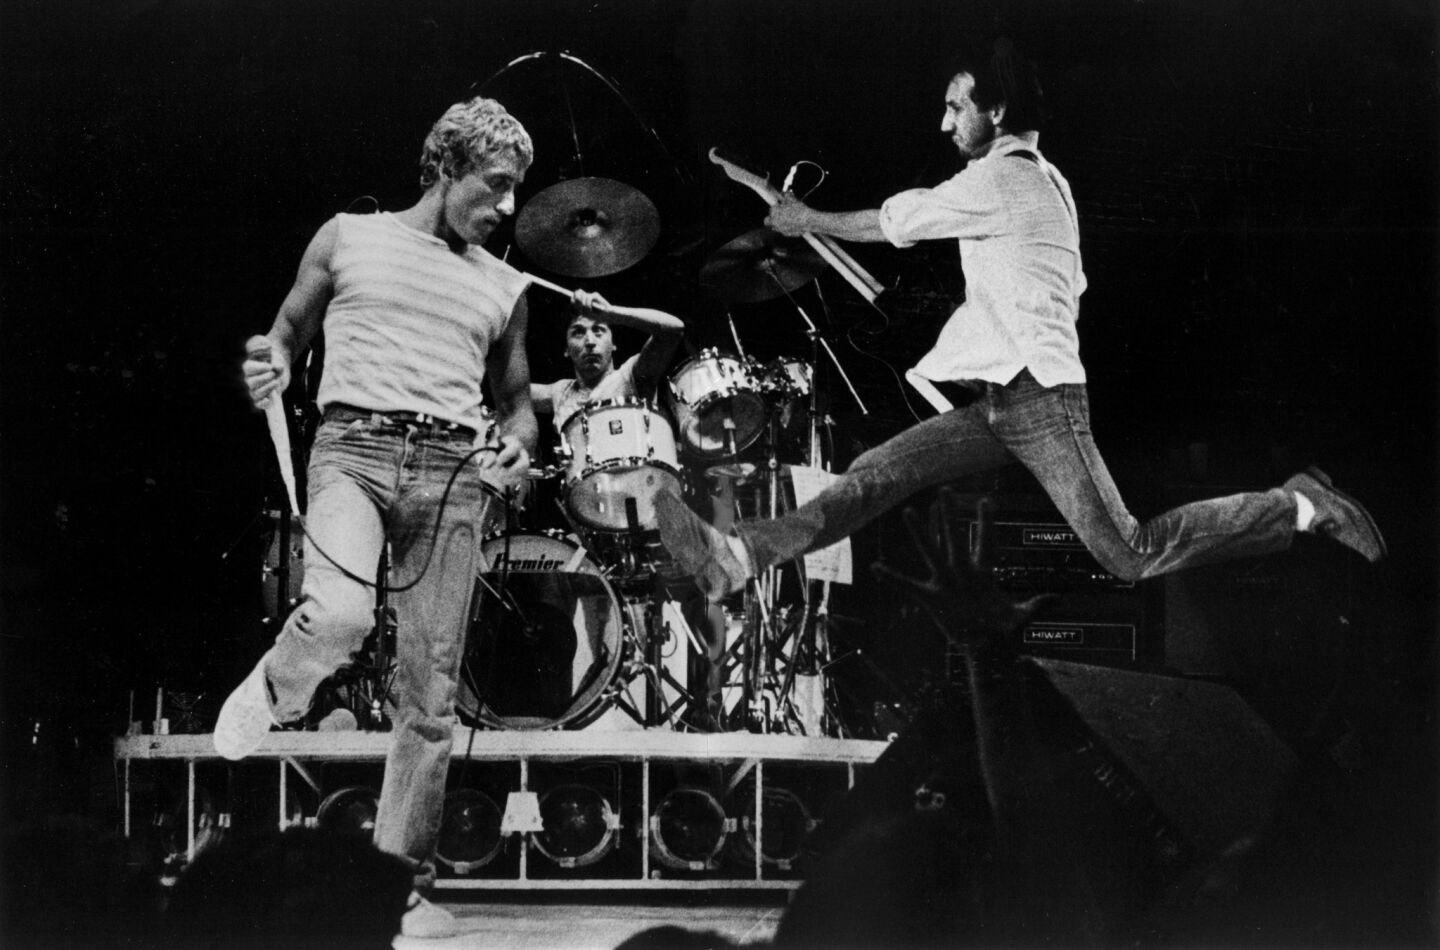 The Who's Roger Daltrey, left, drummer Kenney Jones and Pete Townshend at the Los Angeles Sports Arena on June 24, 1980.